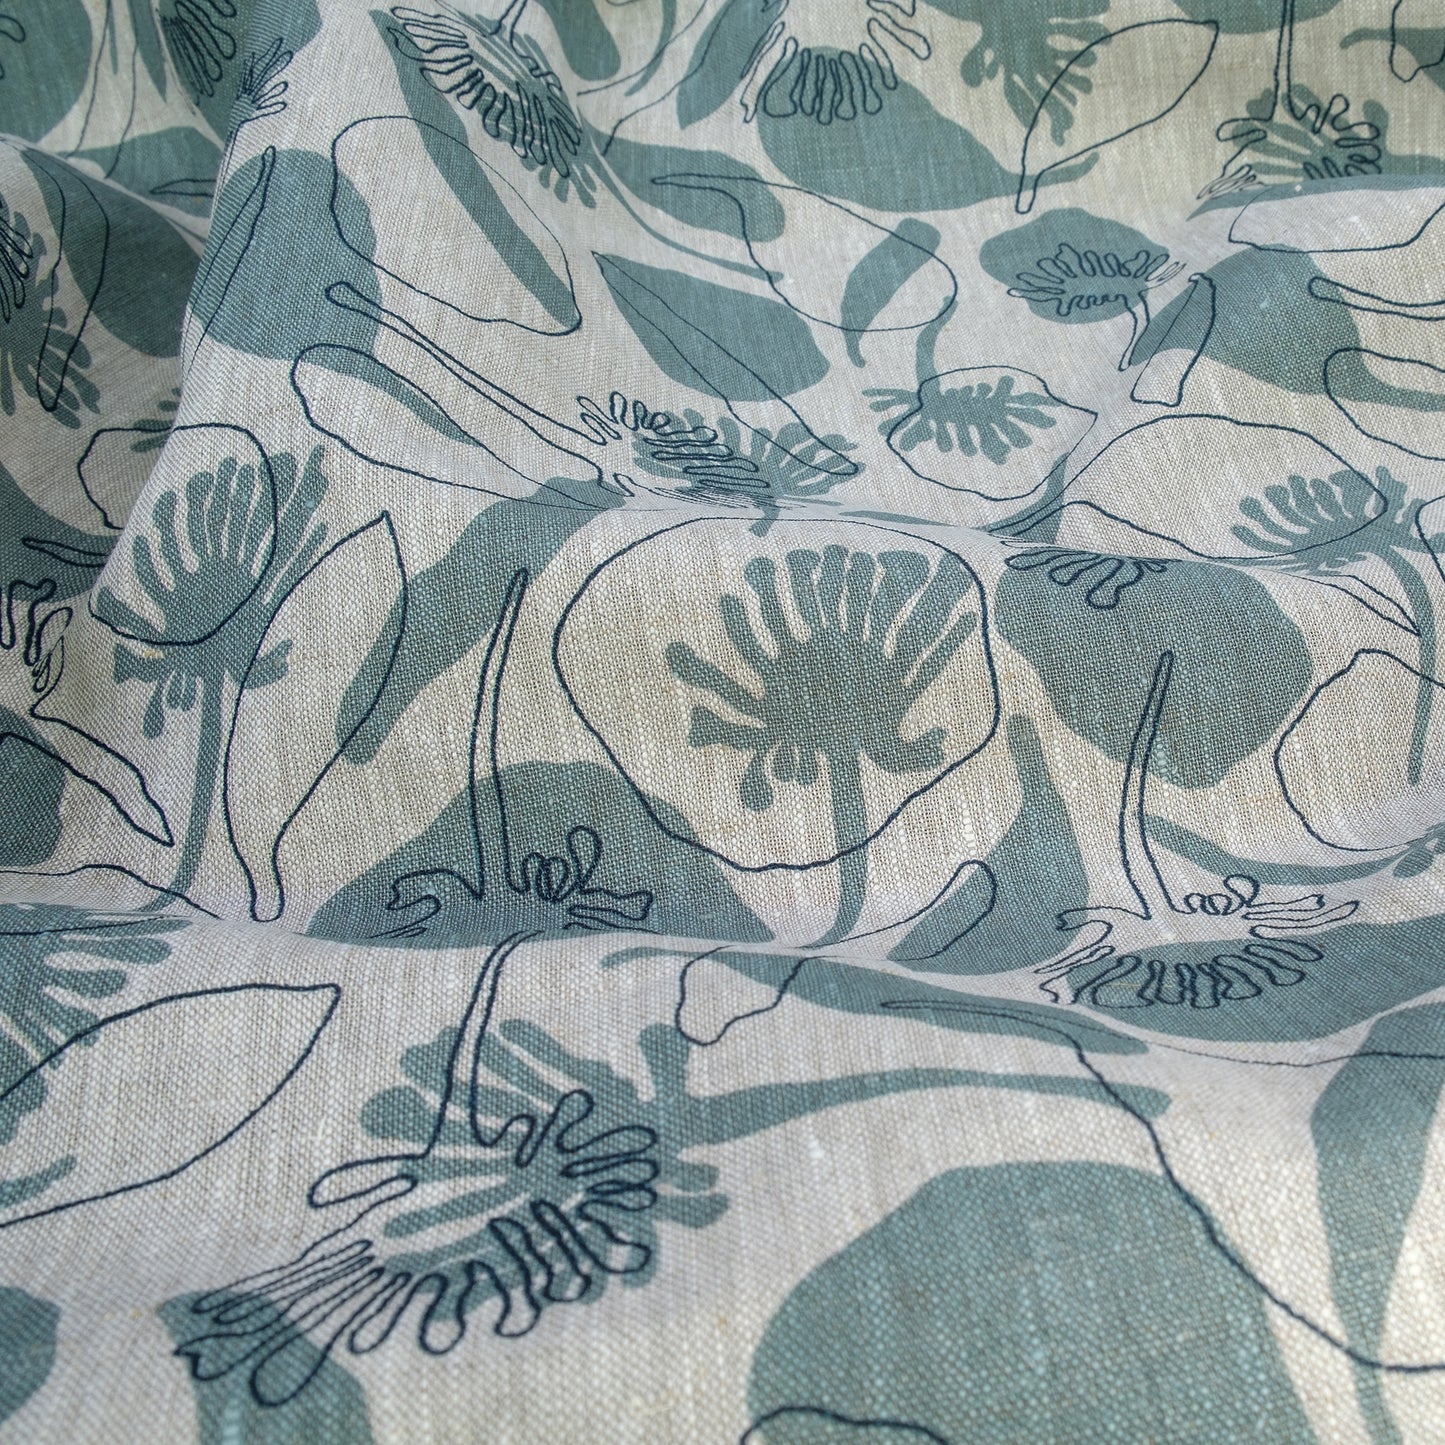 Linen fabric hand screenprinted with seedpods design in storm and indigo colour. Designed and printed by Femke Textiles. Basecloth is an oatmeal linen.